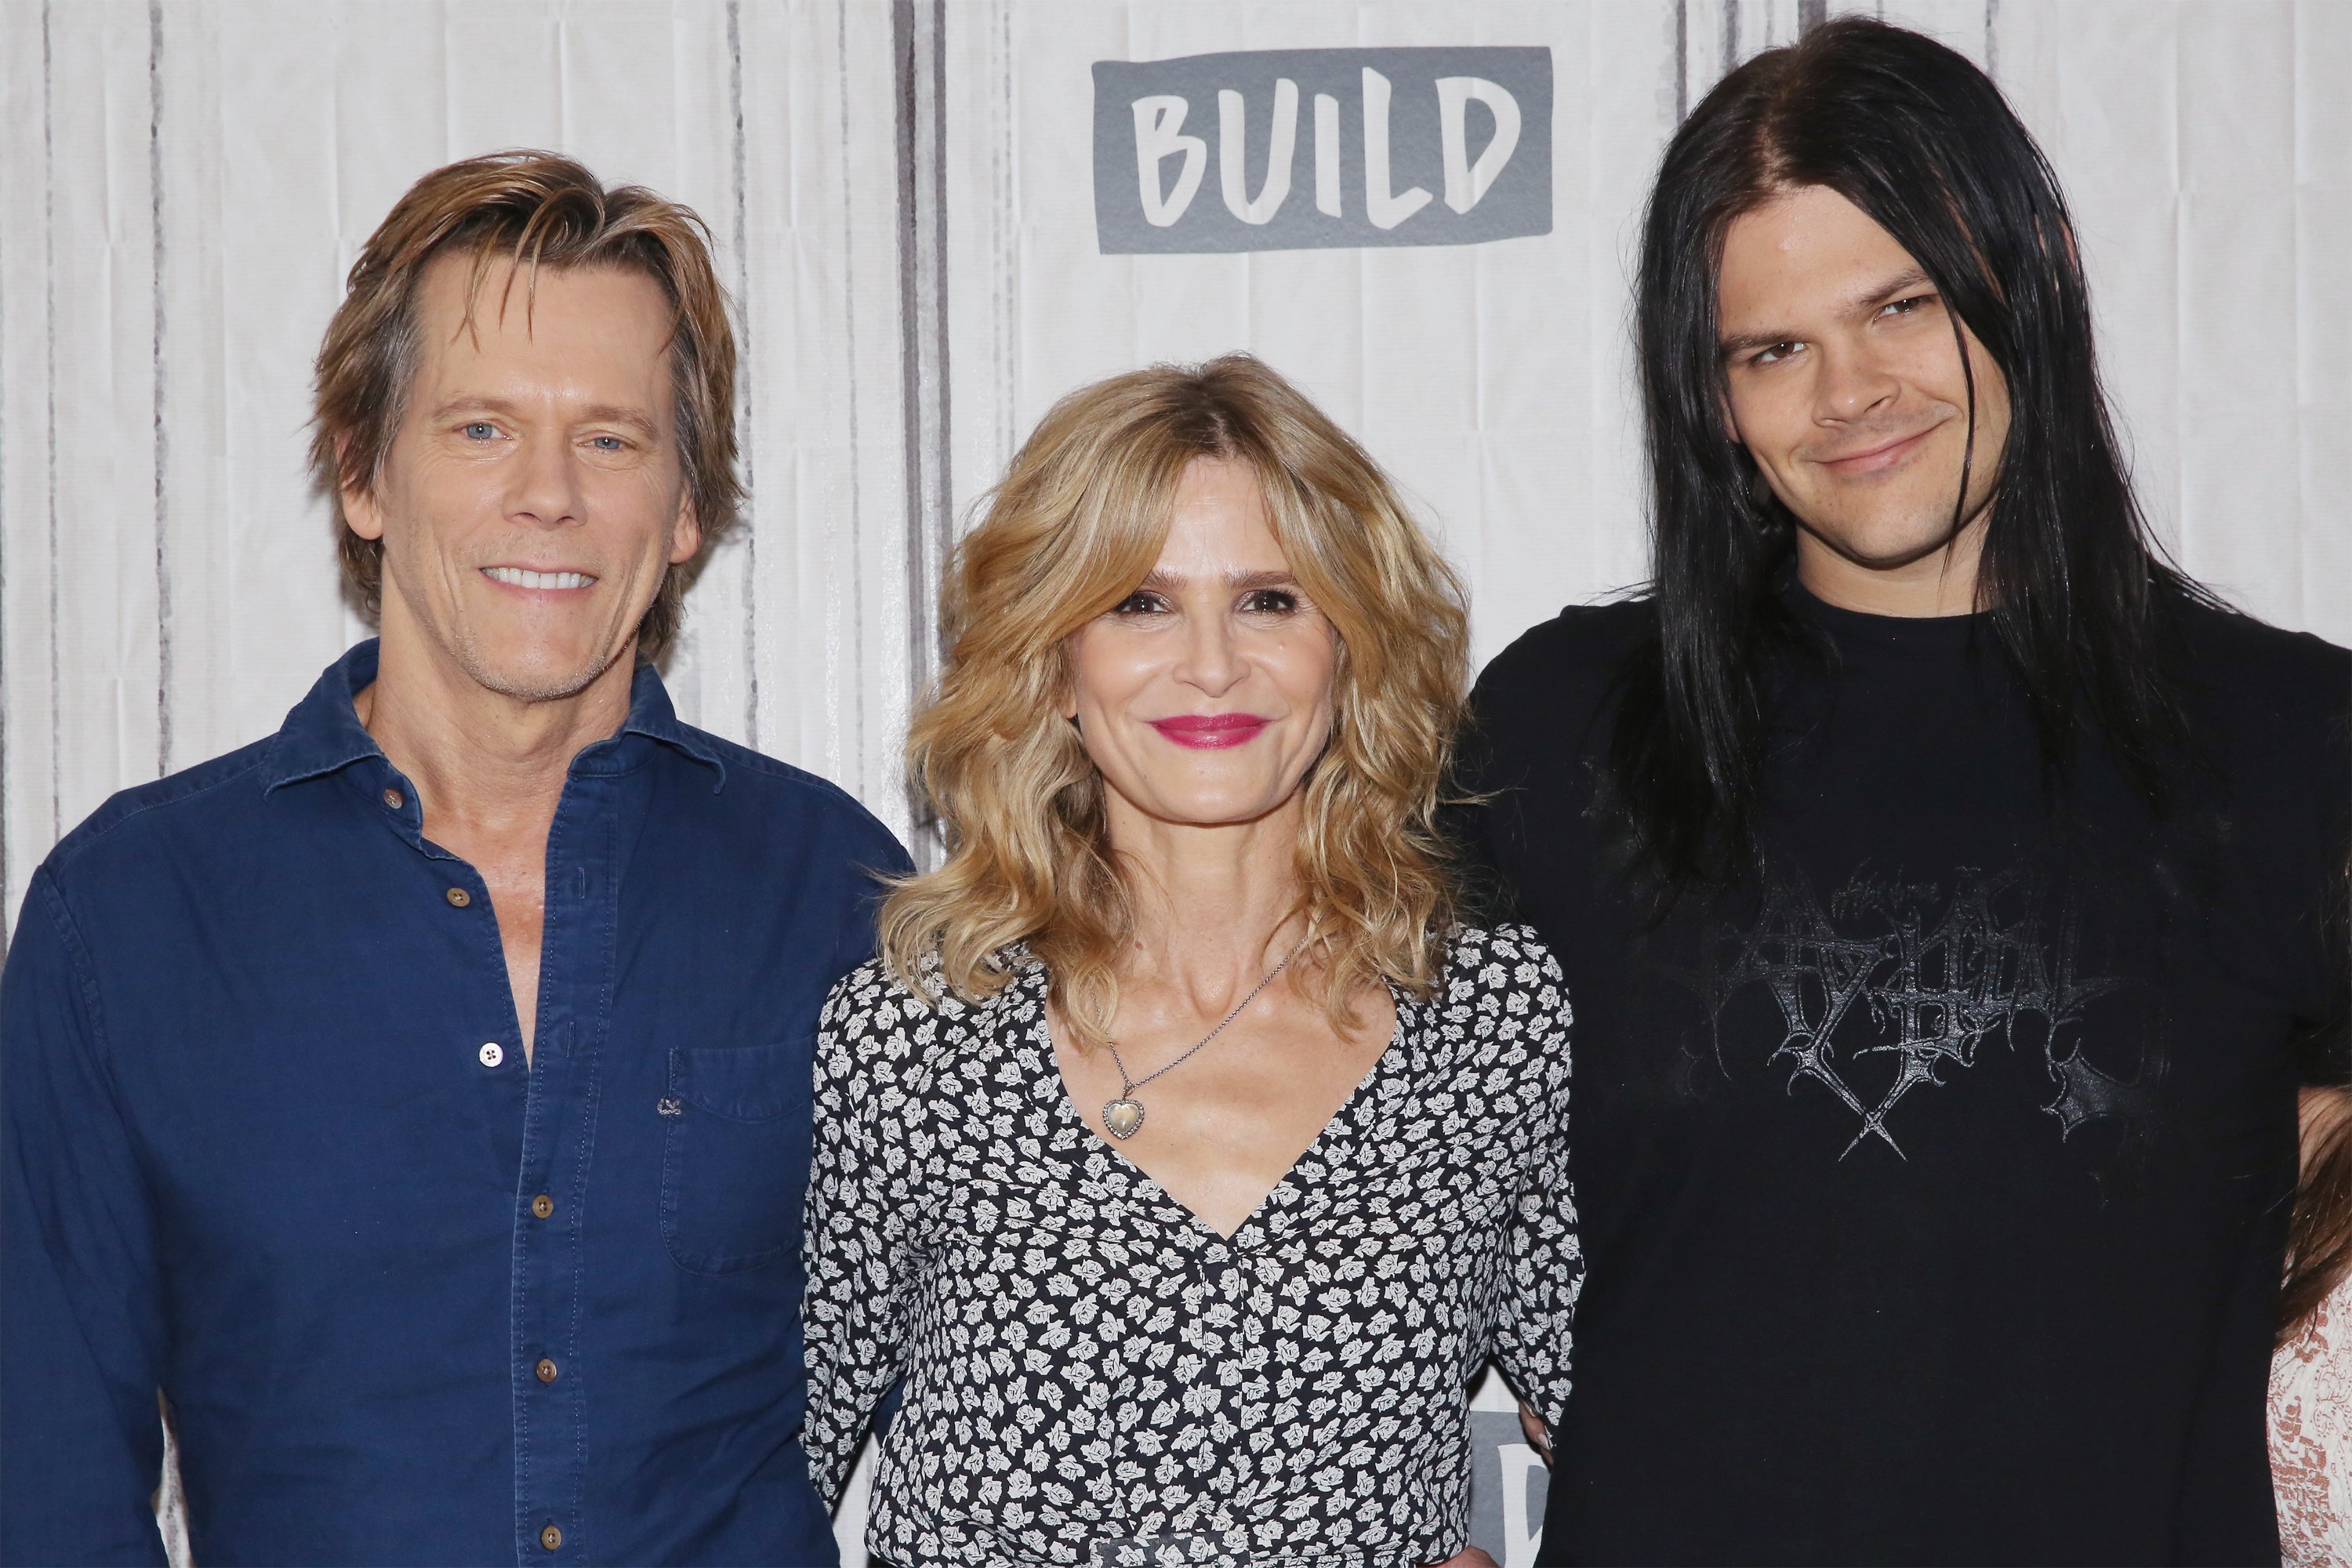 Kevin Bacon, Kyra Sedgwick, and Travis Bacon visit Build to discuss the Lifetime film "Story of a Girl" at Build Studio on July 21, 2017 in New York City. ┃Source: Getty Images